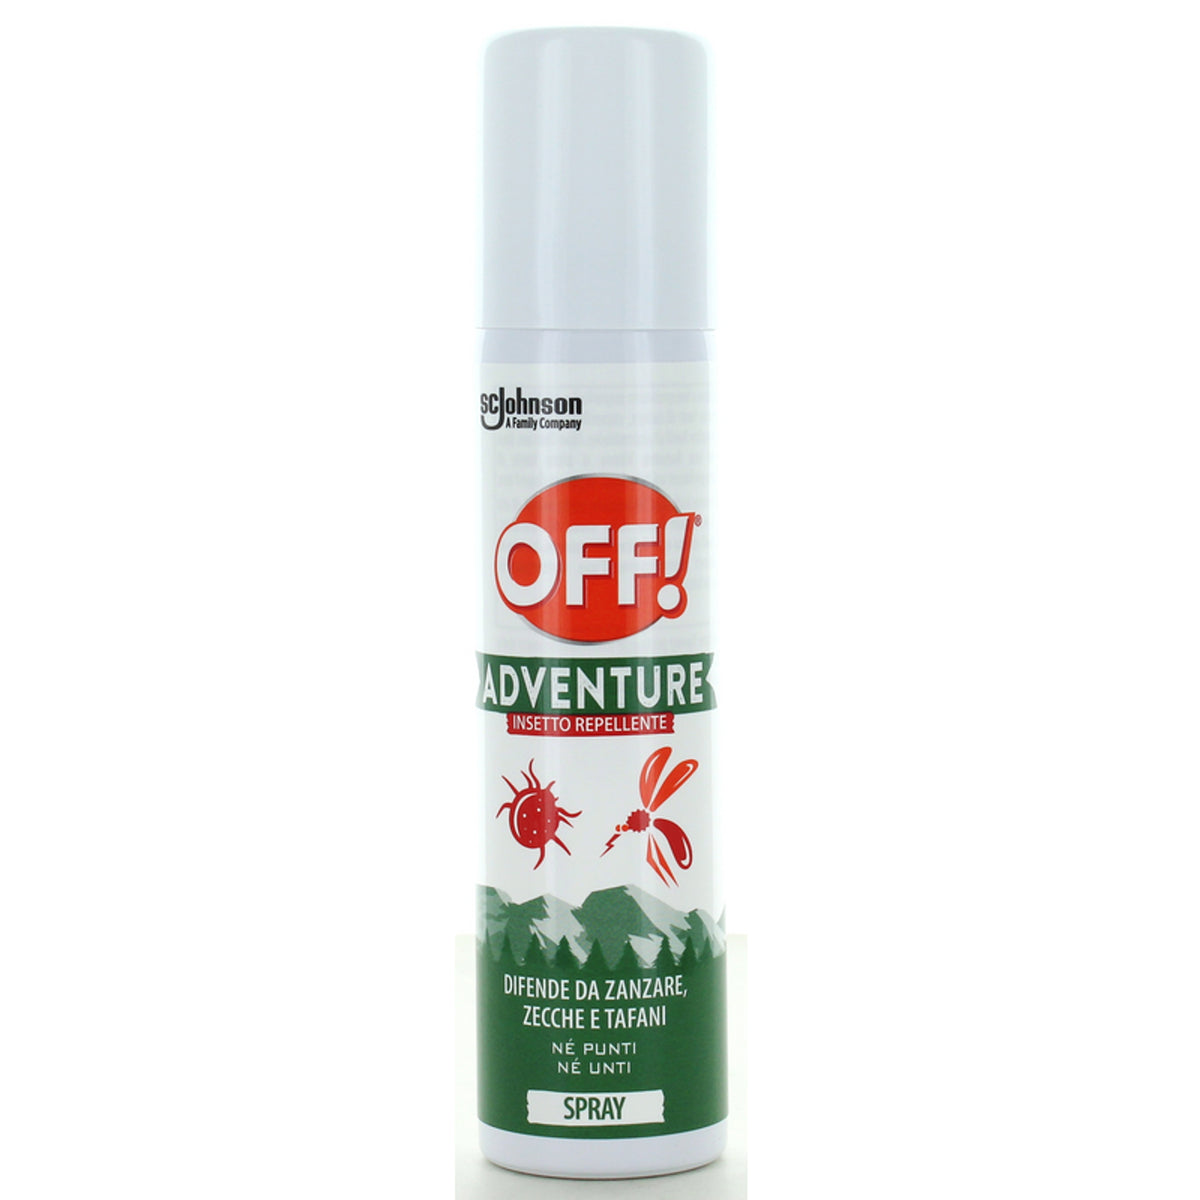 Uit! Avontuur insect spary reparage 100 ml